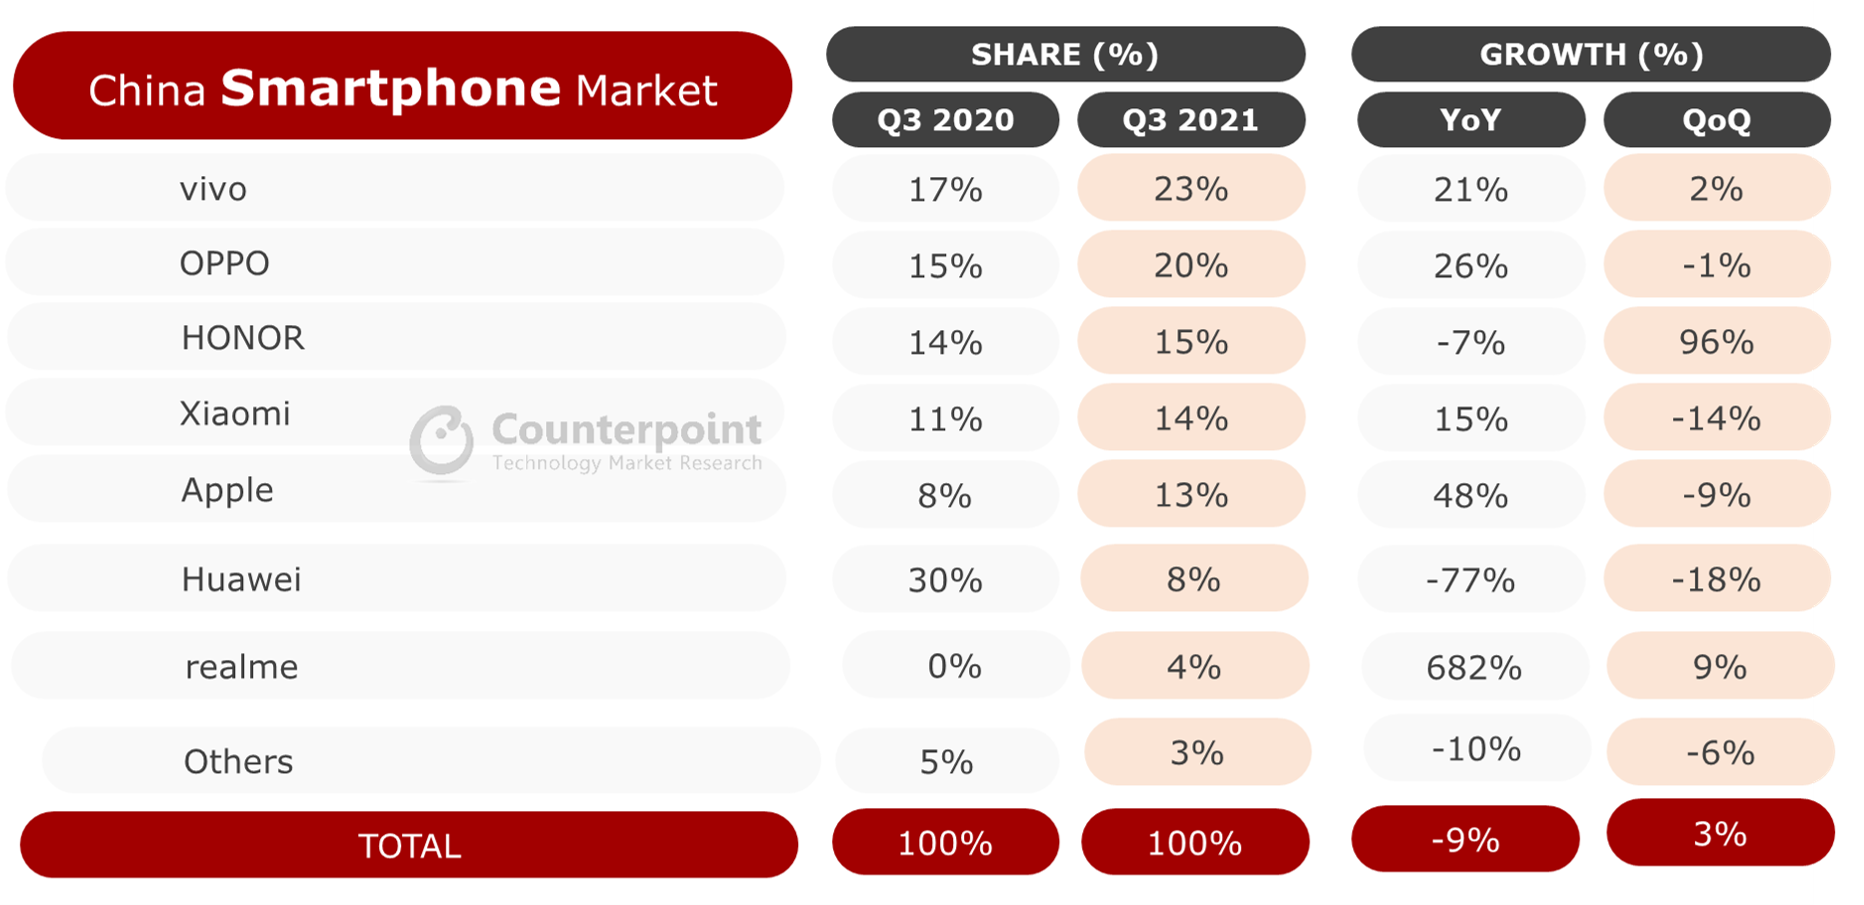 Smartphone Sales Volume Share of Key OEMs in China